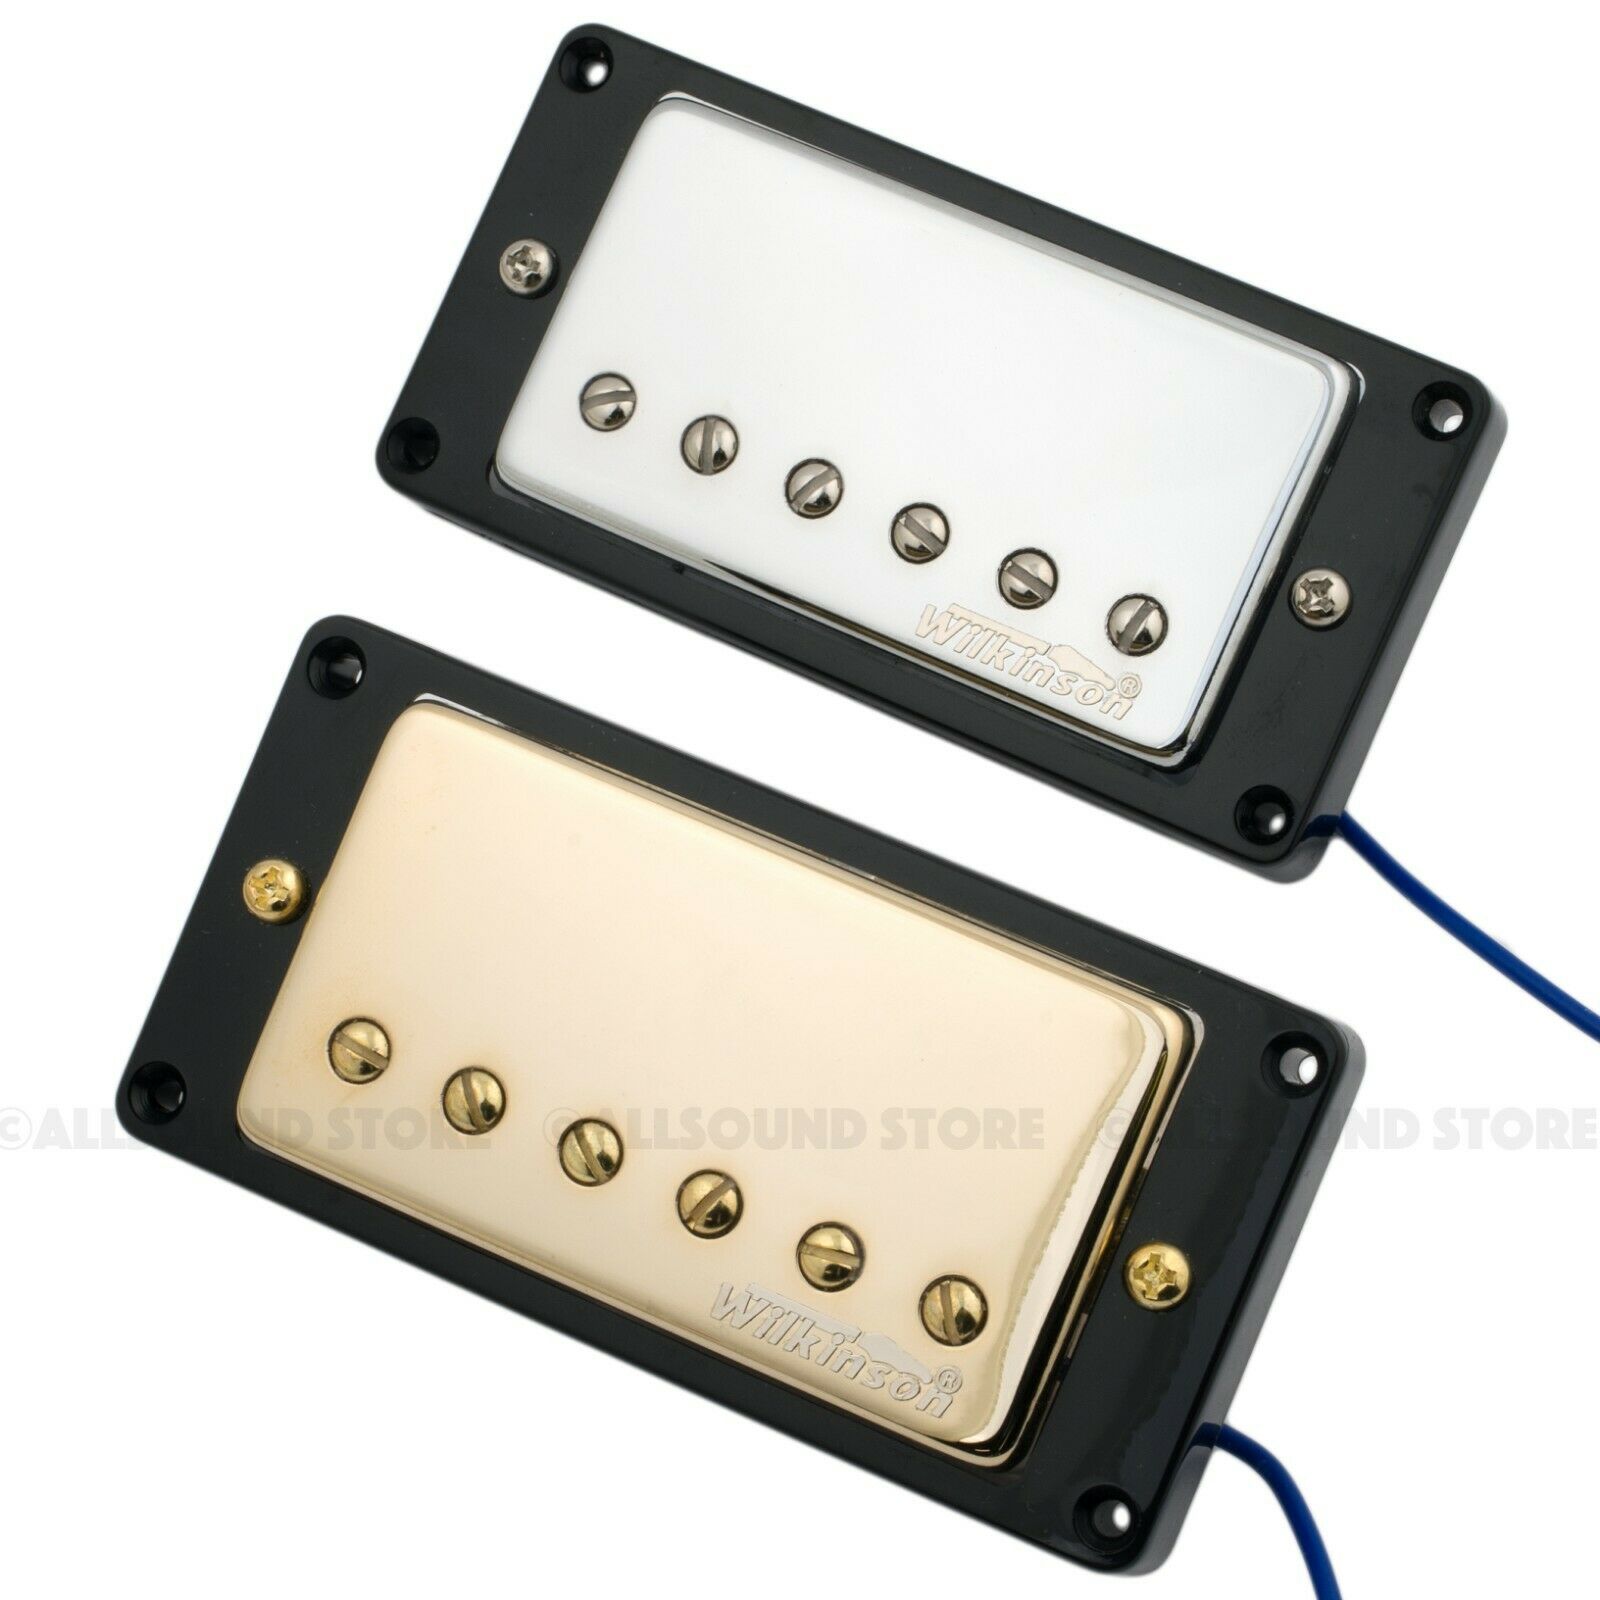 Wilkinson 'hot' Humbucker Pickups For Gibson® Epiphone® Mwchb - Chrome, Gold New